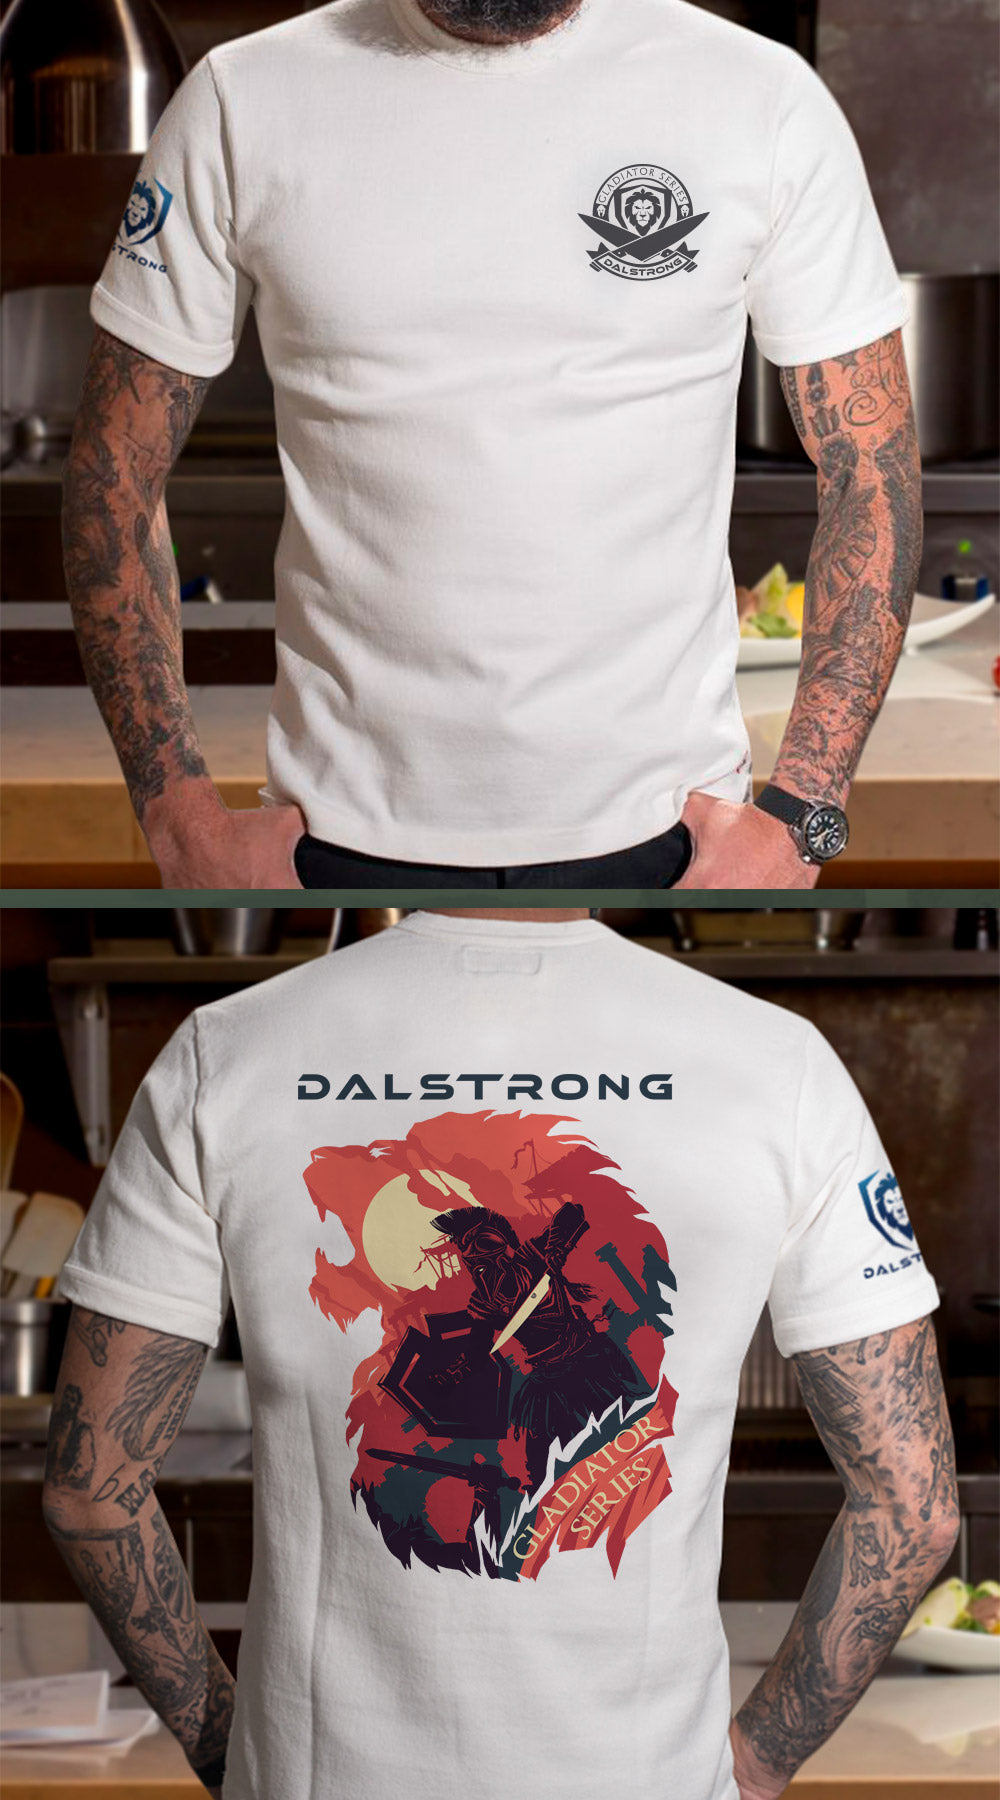 Dalstrong fight for glory tee white front and back preview.